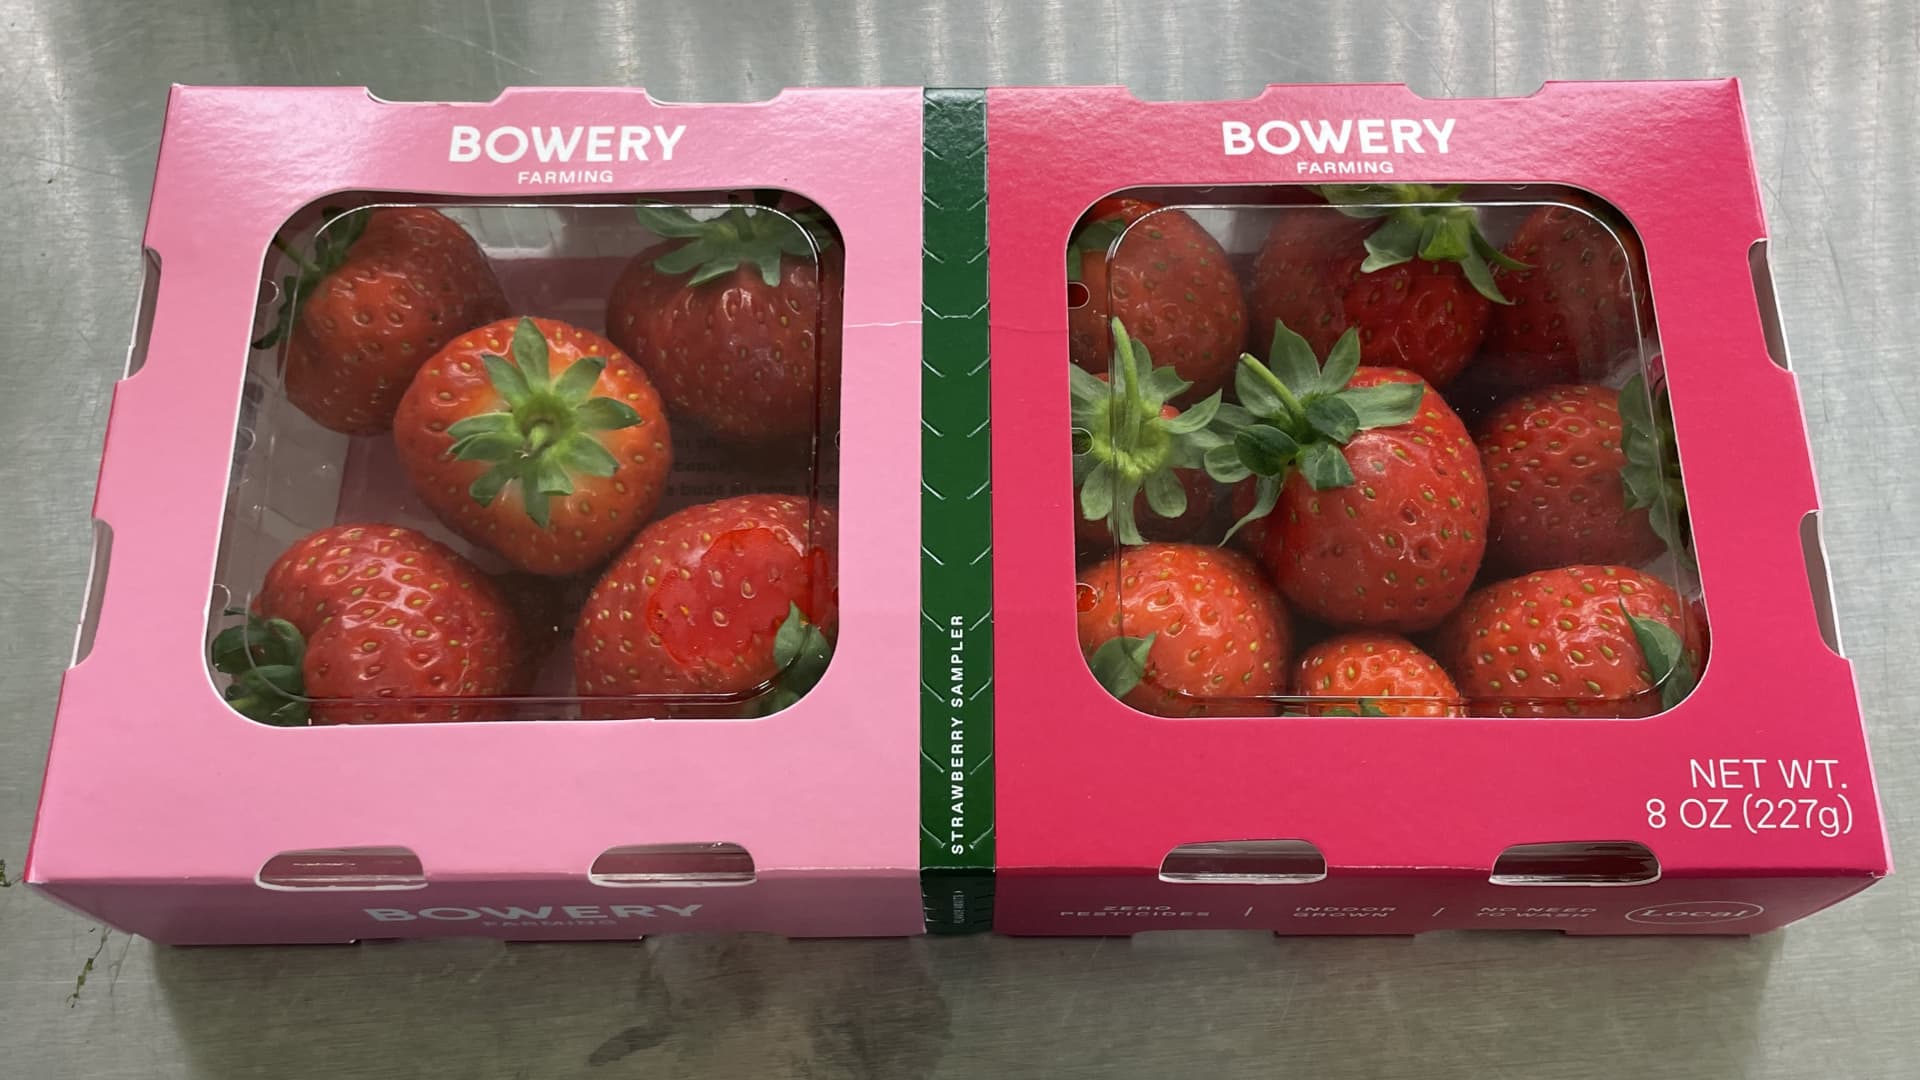 Bowery Farming will sell strawberries for the first time at a few gourmet grocery stores in New York City. They will also be on the menu at some celebrity chefs' restaurants.